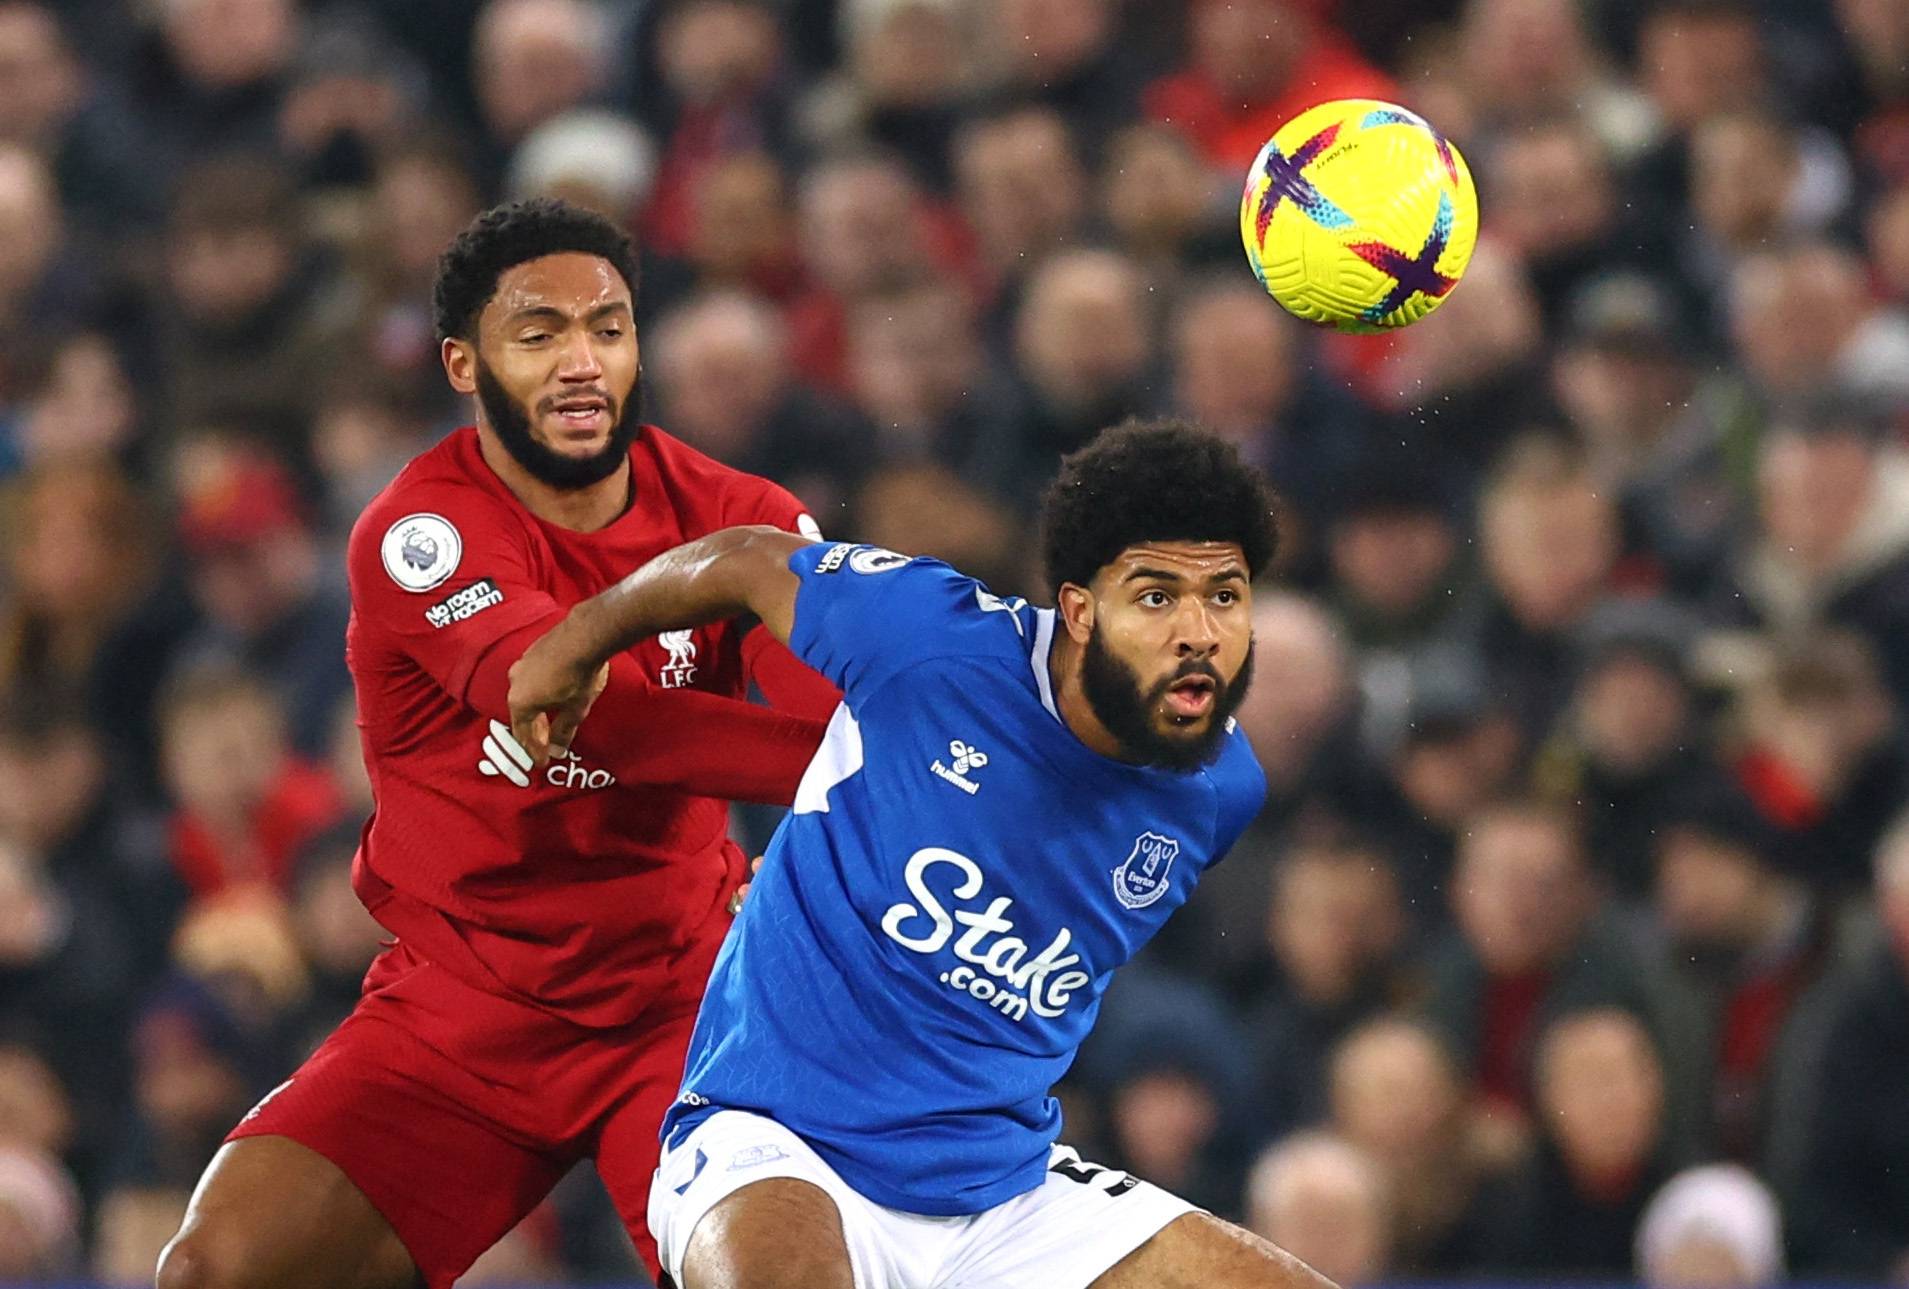 Liverpool could have Joe Gomez fit for Real Madrid clash - Follow up